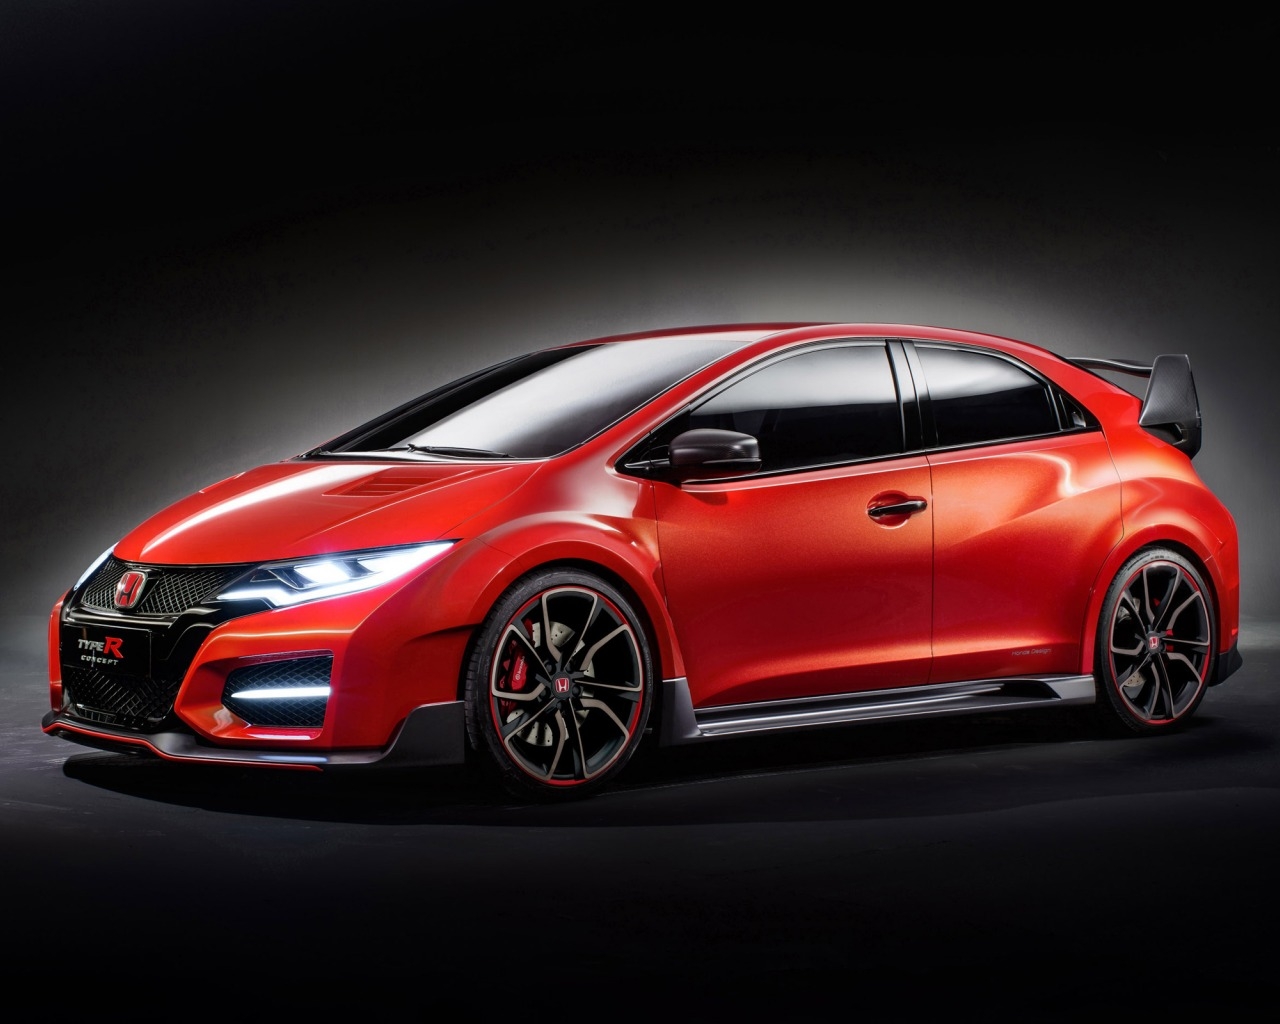 Honda Civic Type R Concept for 1280 x 1024 resolution